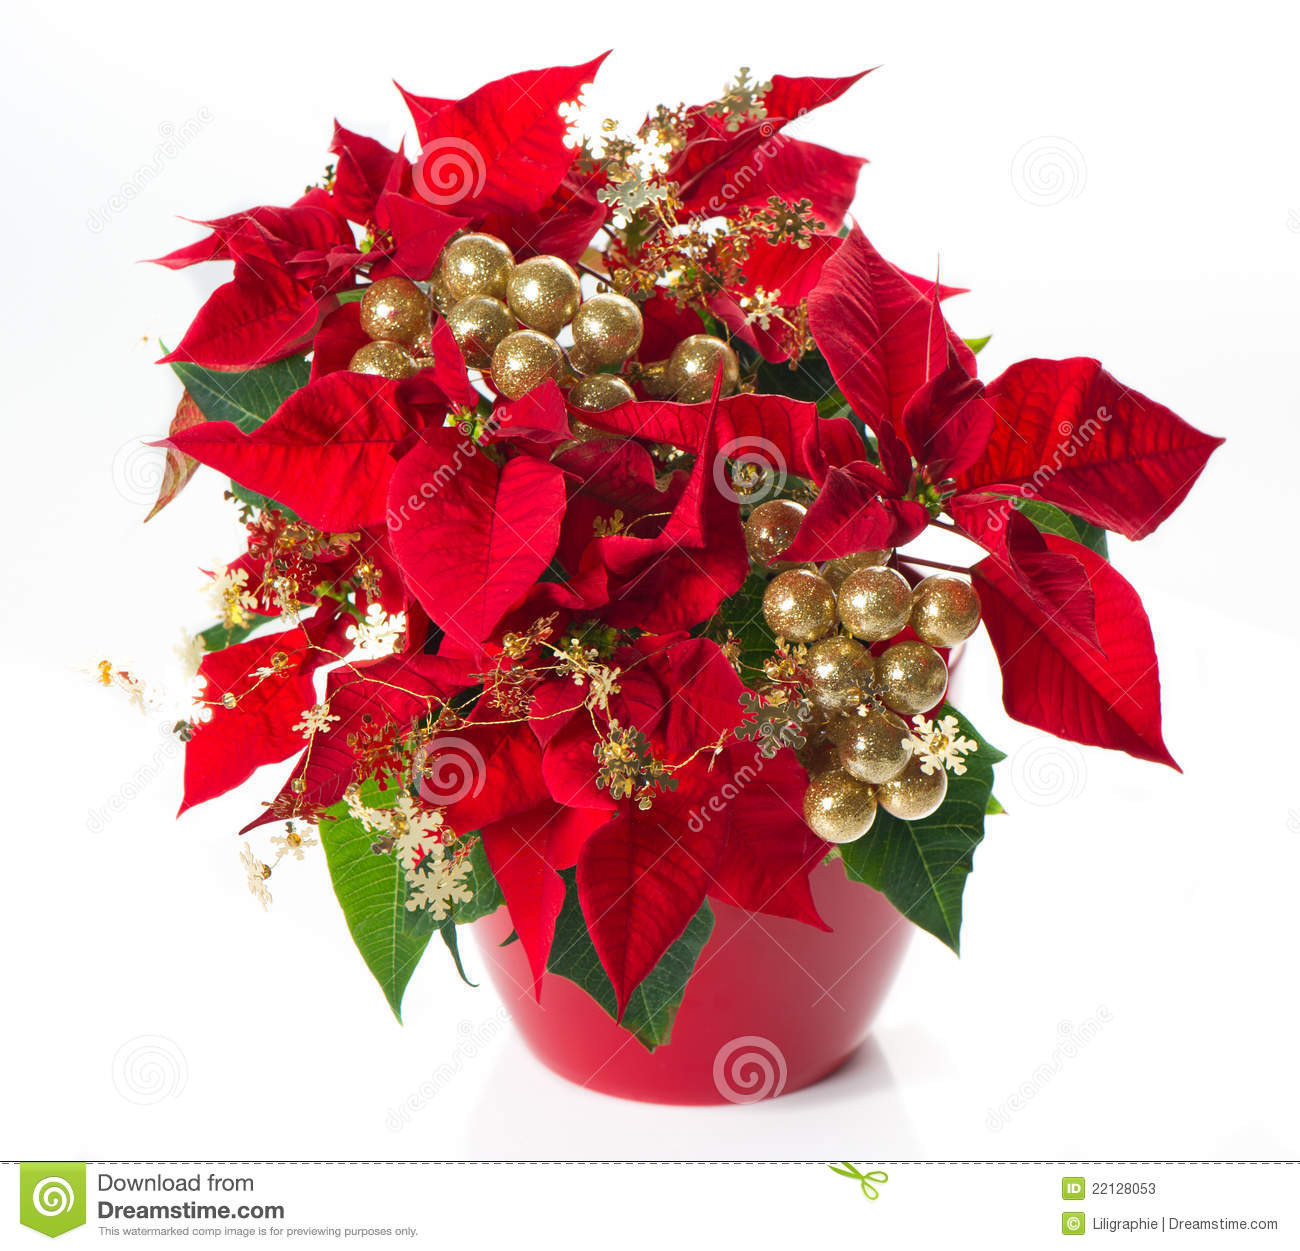 Red Christmas Flower
 Red Poinsettia Christmas Flower With Golden Deco Stock